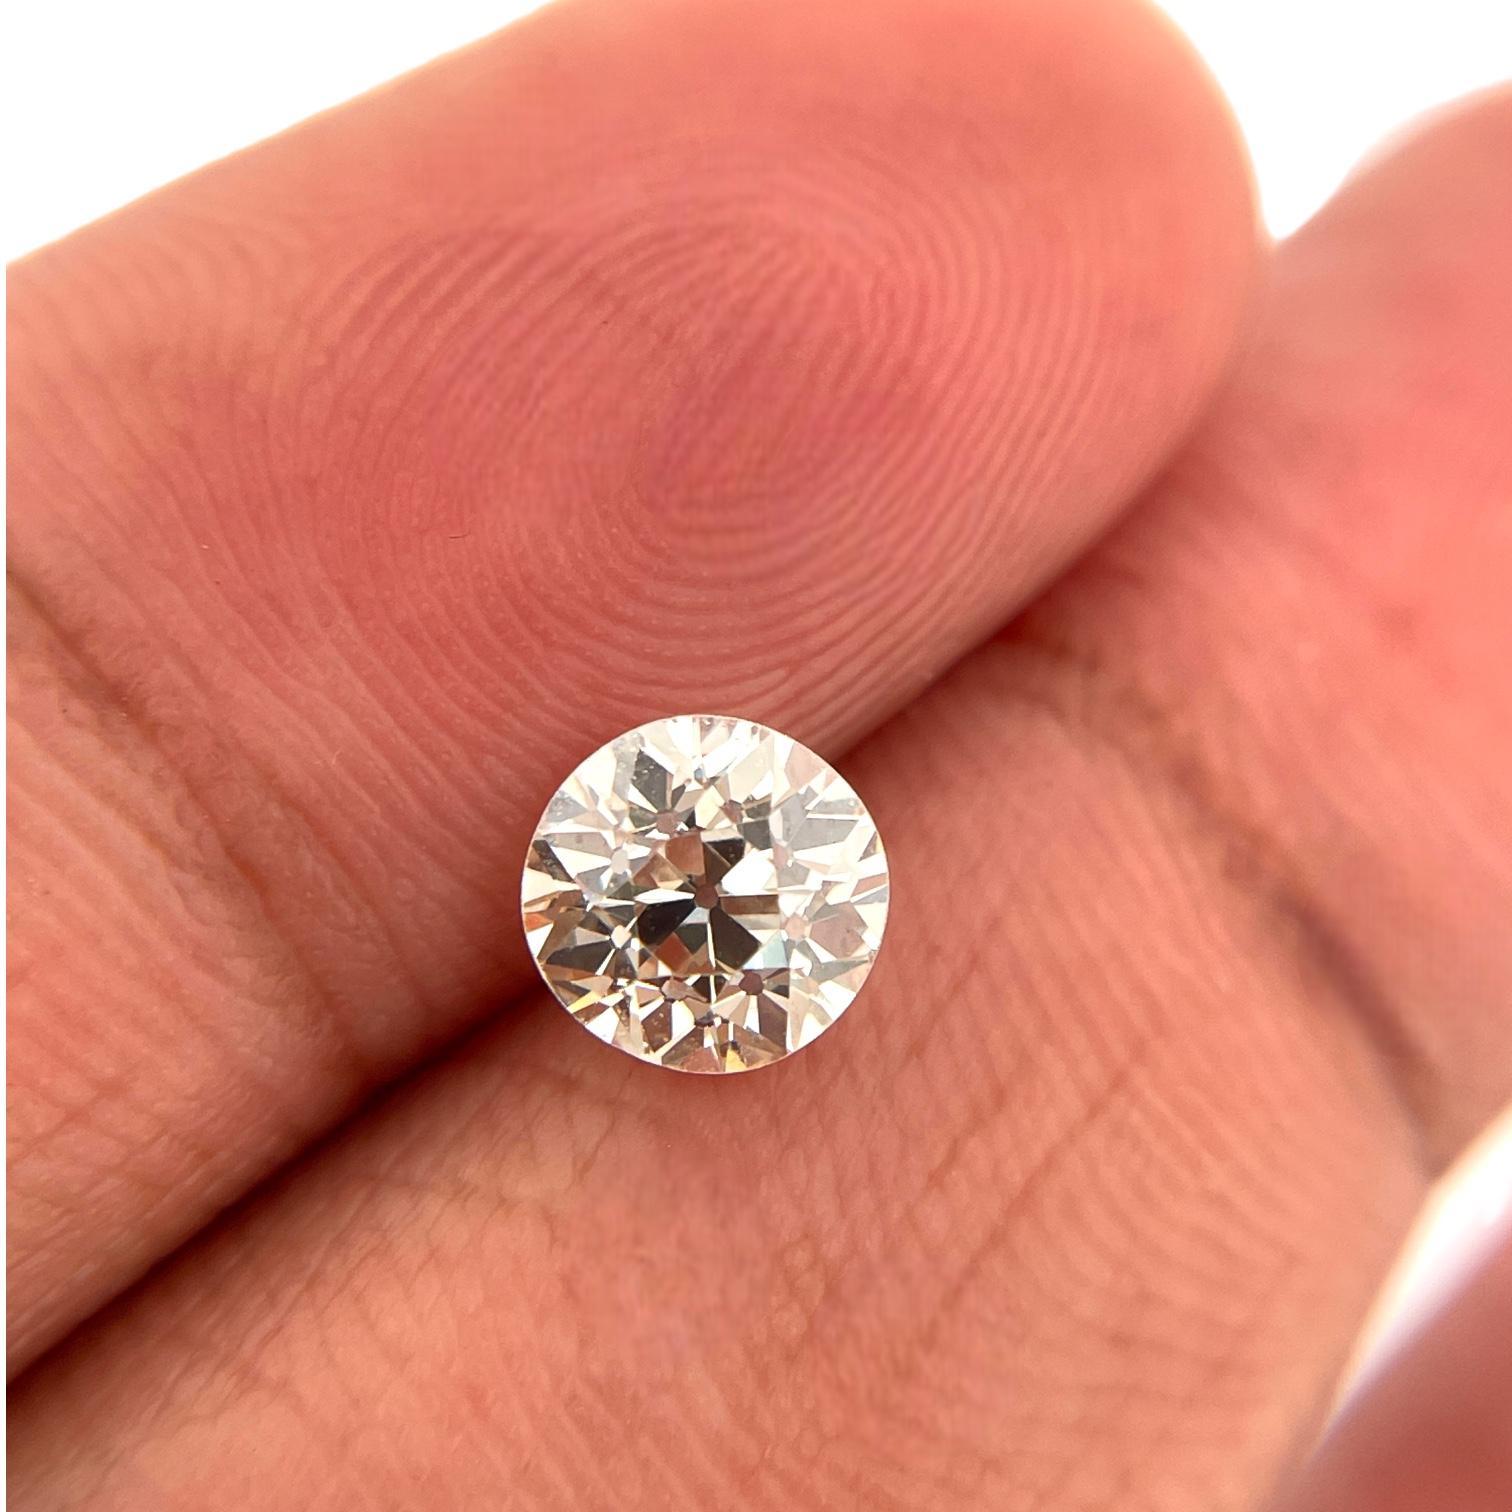 GIA Certified 1.29 Carat Old European Natural Diamond In Excellent Condition For Sale In New York, NY